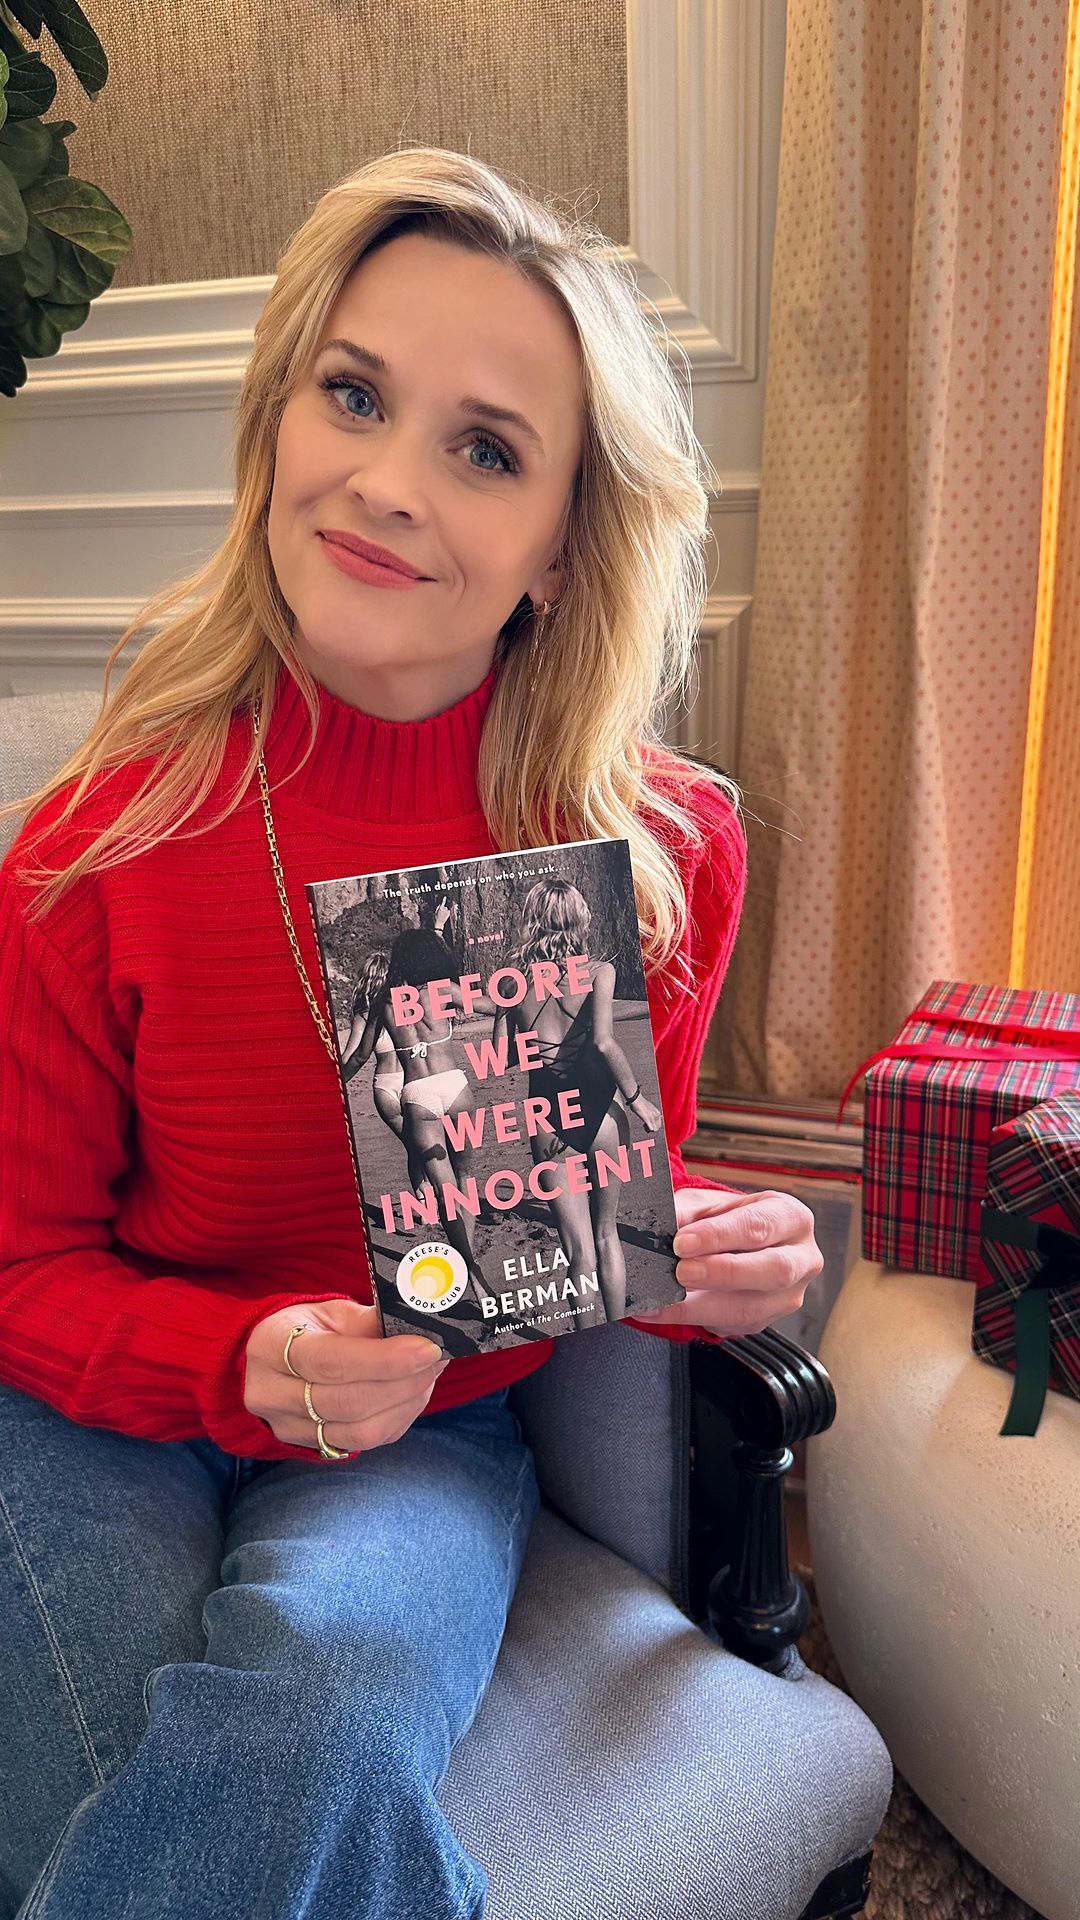 Reese Witherspoon – Instagram post